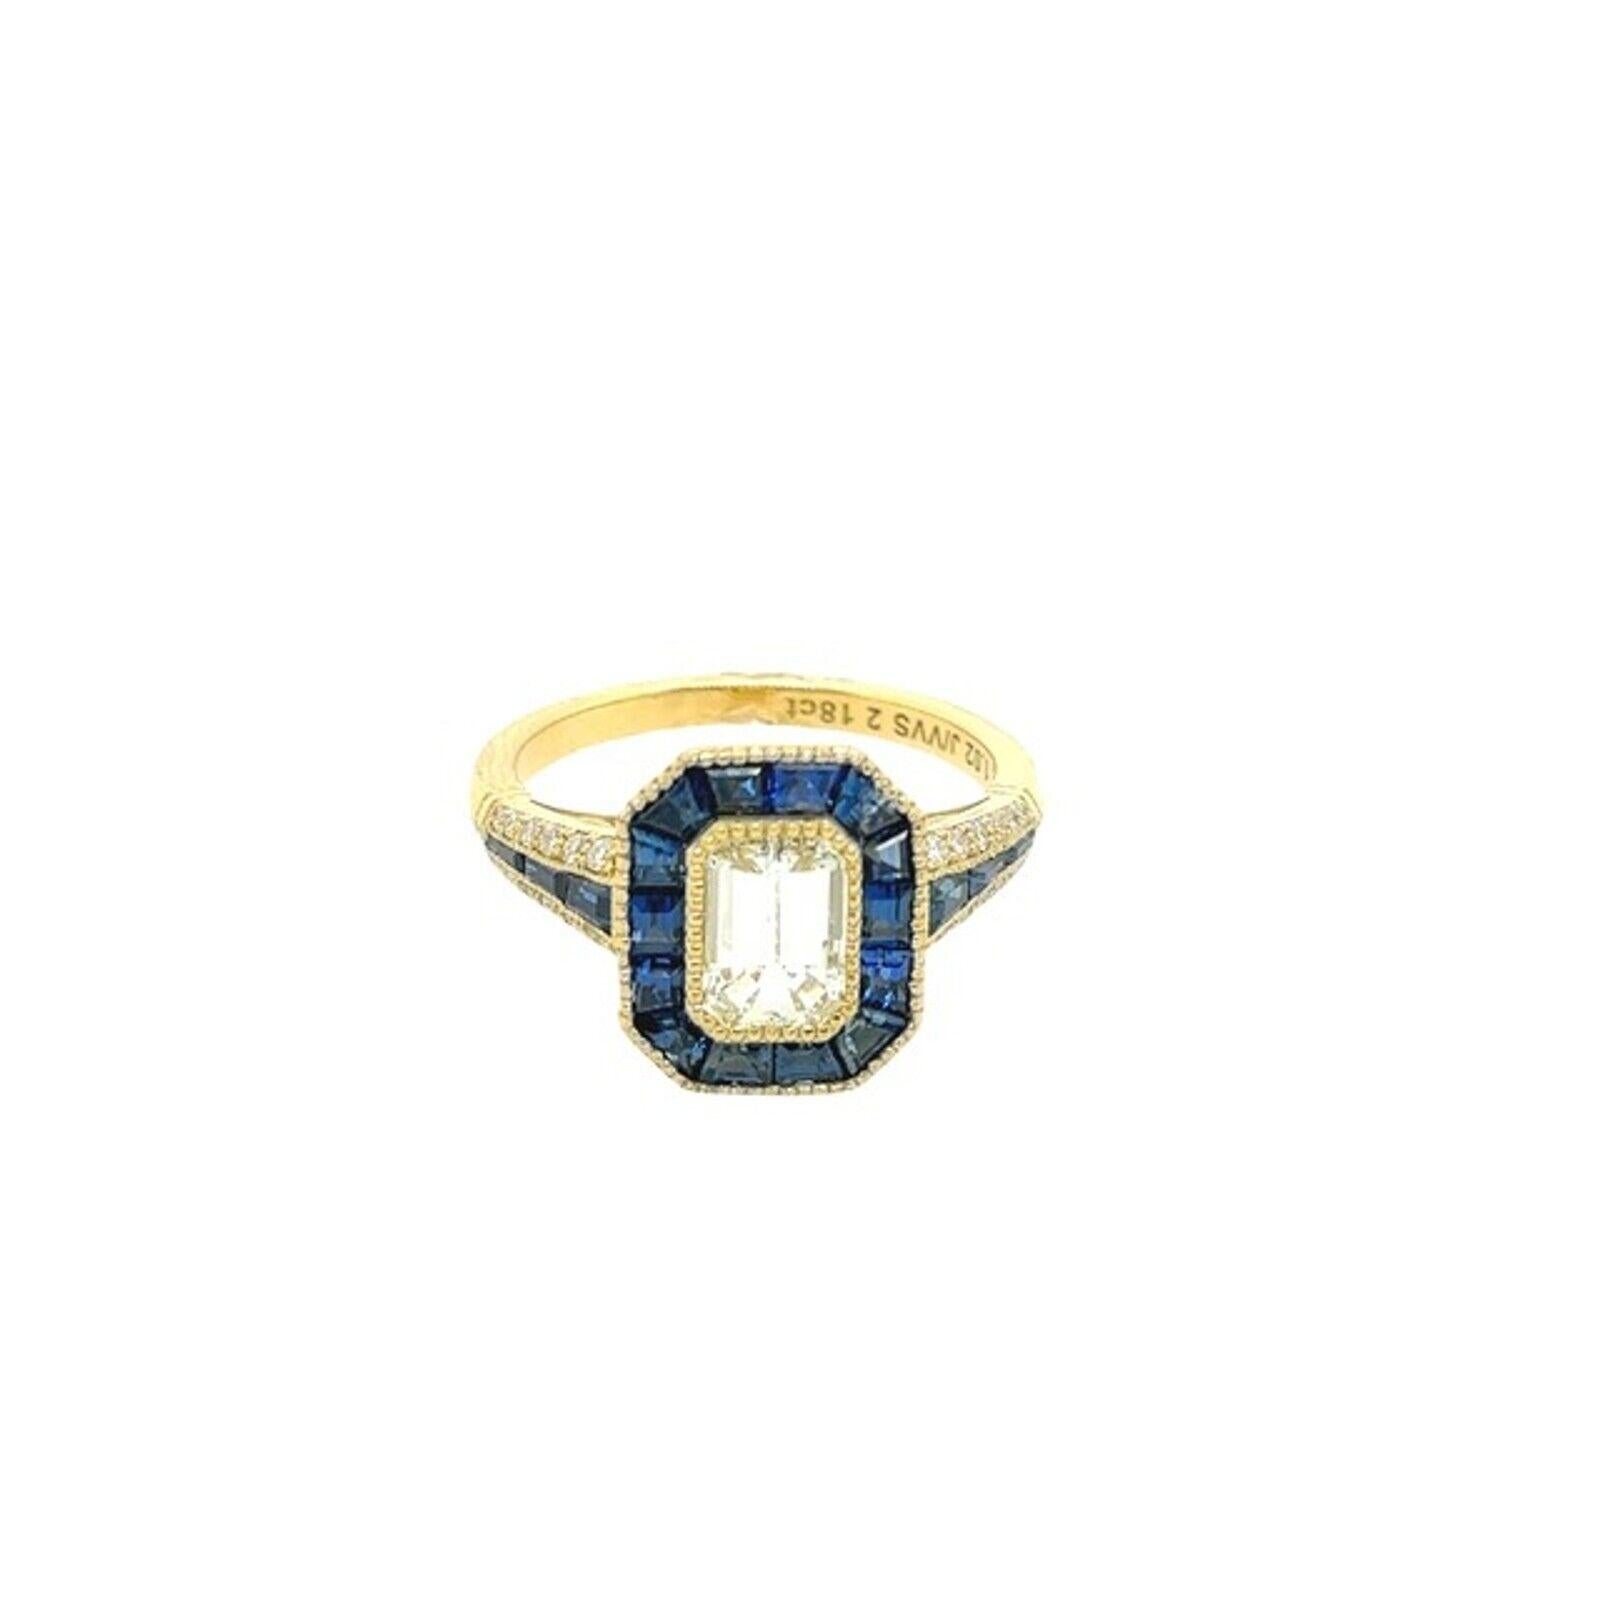 18ct Yellow Gold 1.02ct J/VVS2 Emerald Cut Diamond Set With Sapphire Halo

This stunning 18ct yellow Gold 1.02ct J/VVS2 emerald cut diamond ring, J-colour grade and remarkable VVS2 clarity. Surrounding the center stone, an elegant halo of vibrant